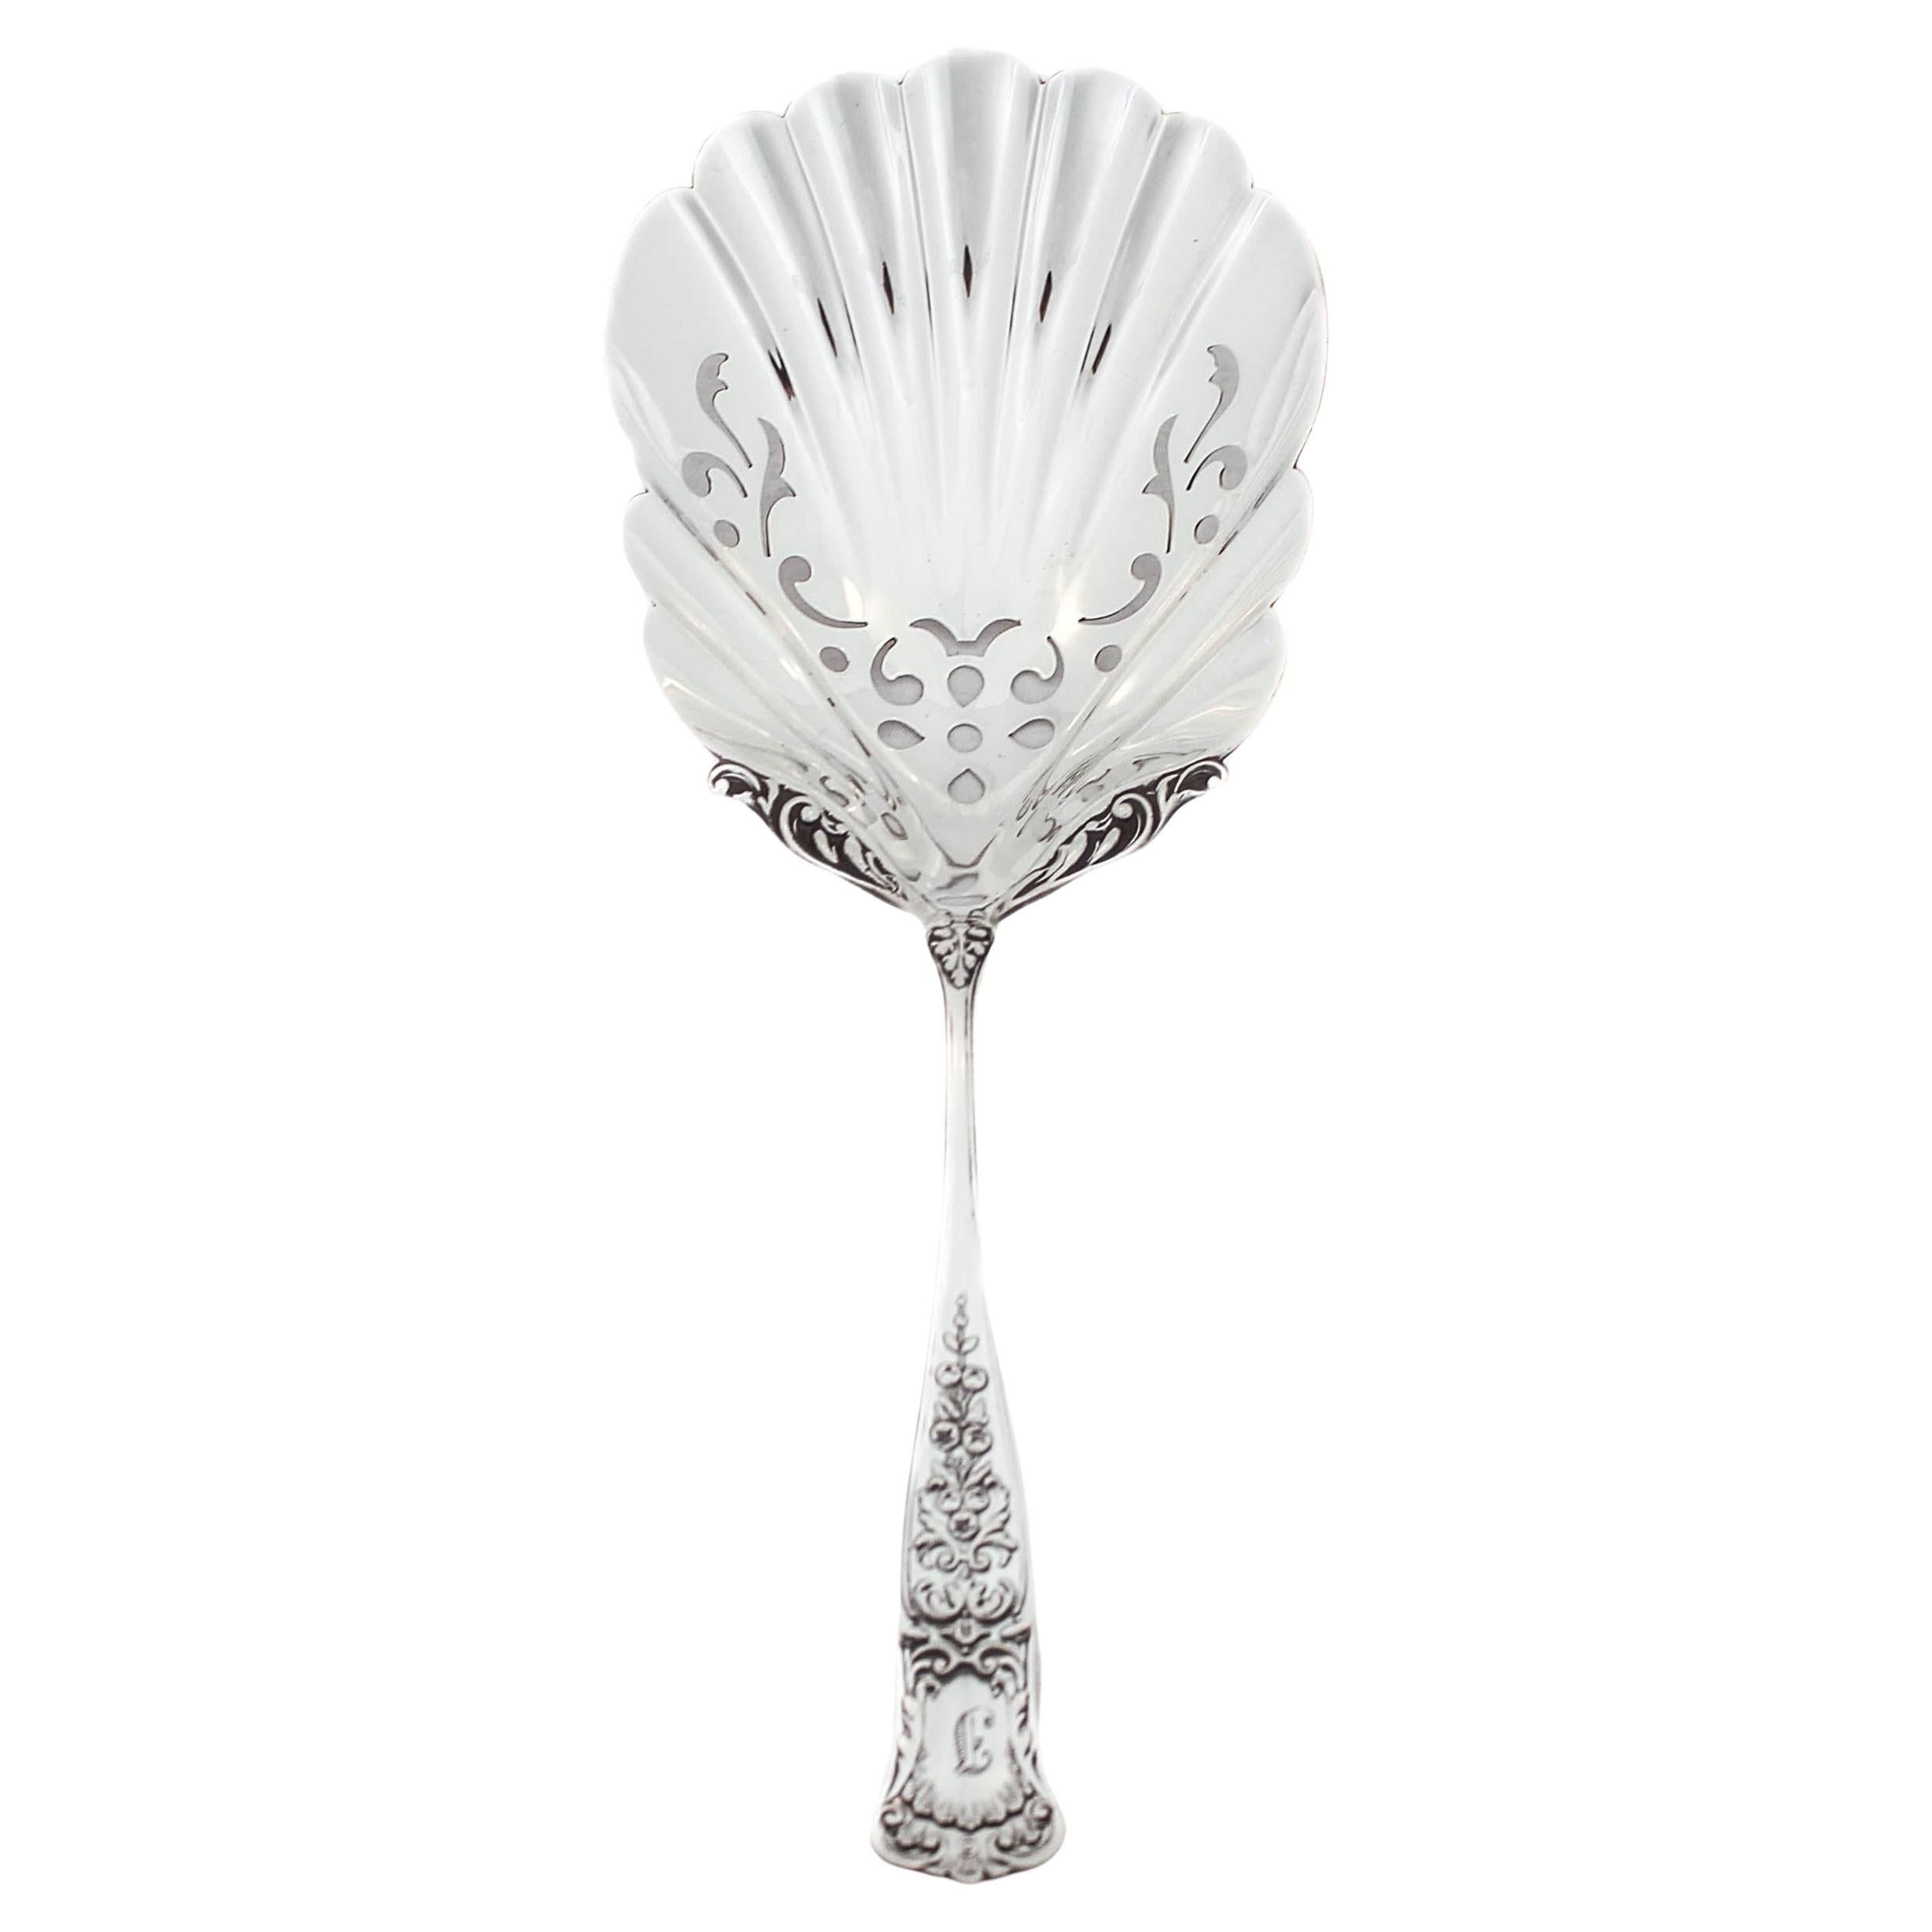 Sterling Silver “Maryland” Serving Spoon